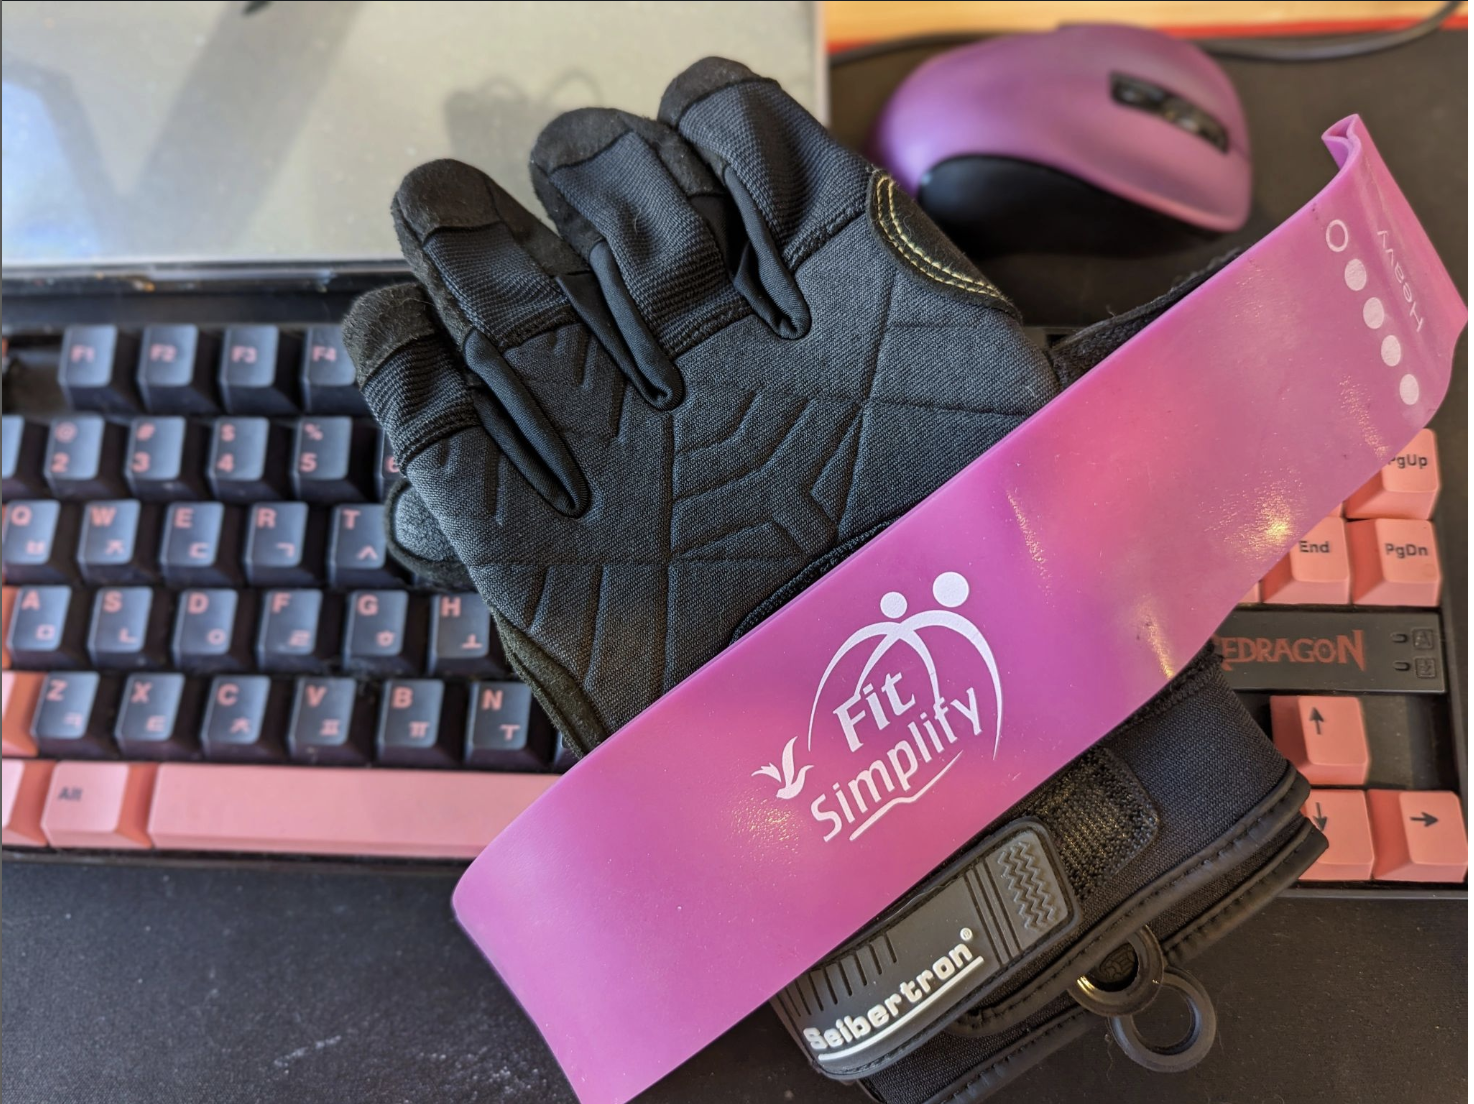 A purple stretch band and black workout gloves laying on a pink and black computer keyboard.